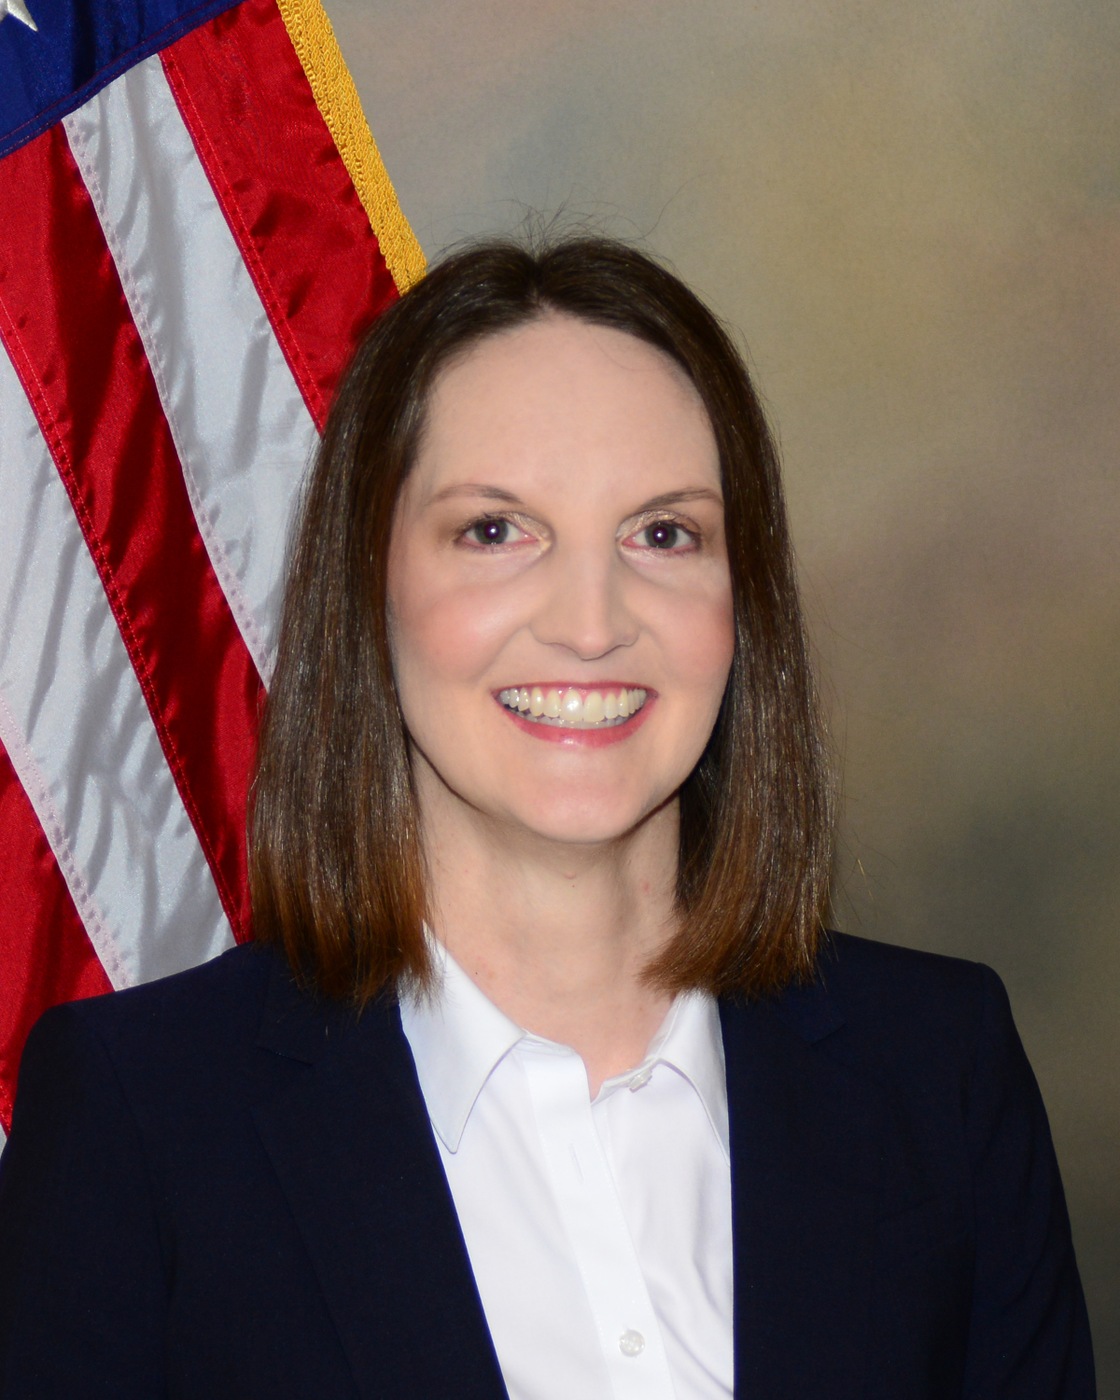 Celebration of 50 years of female special agents in the FBI. Rebecca Day from the Oklahoma City Field Office.